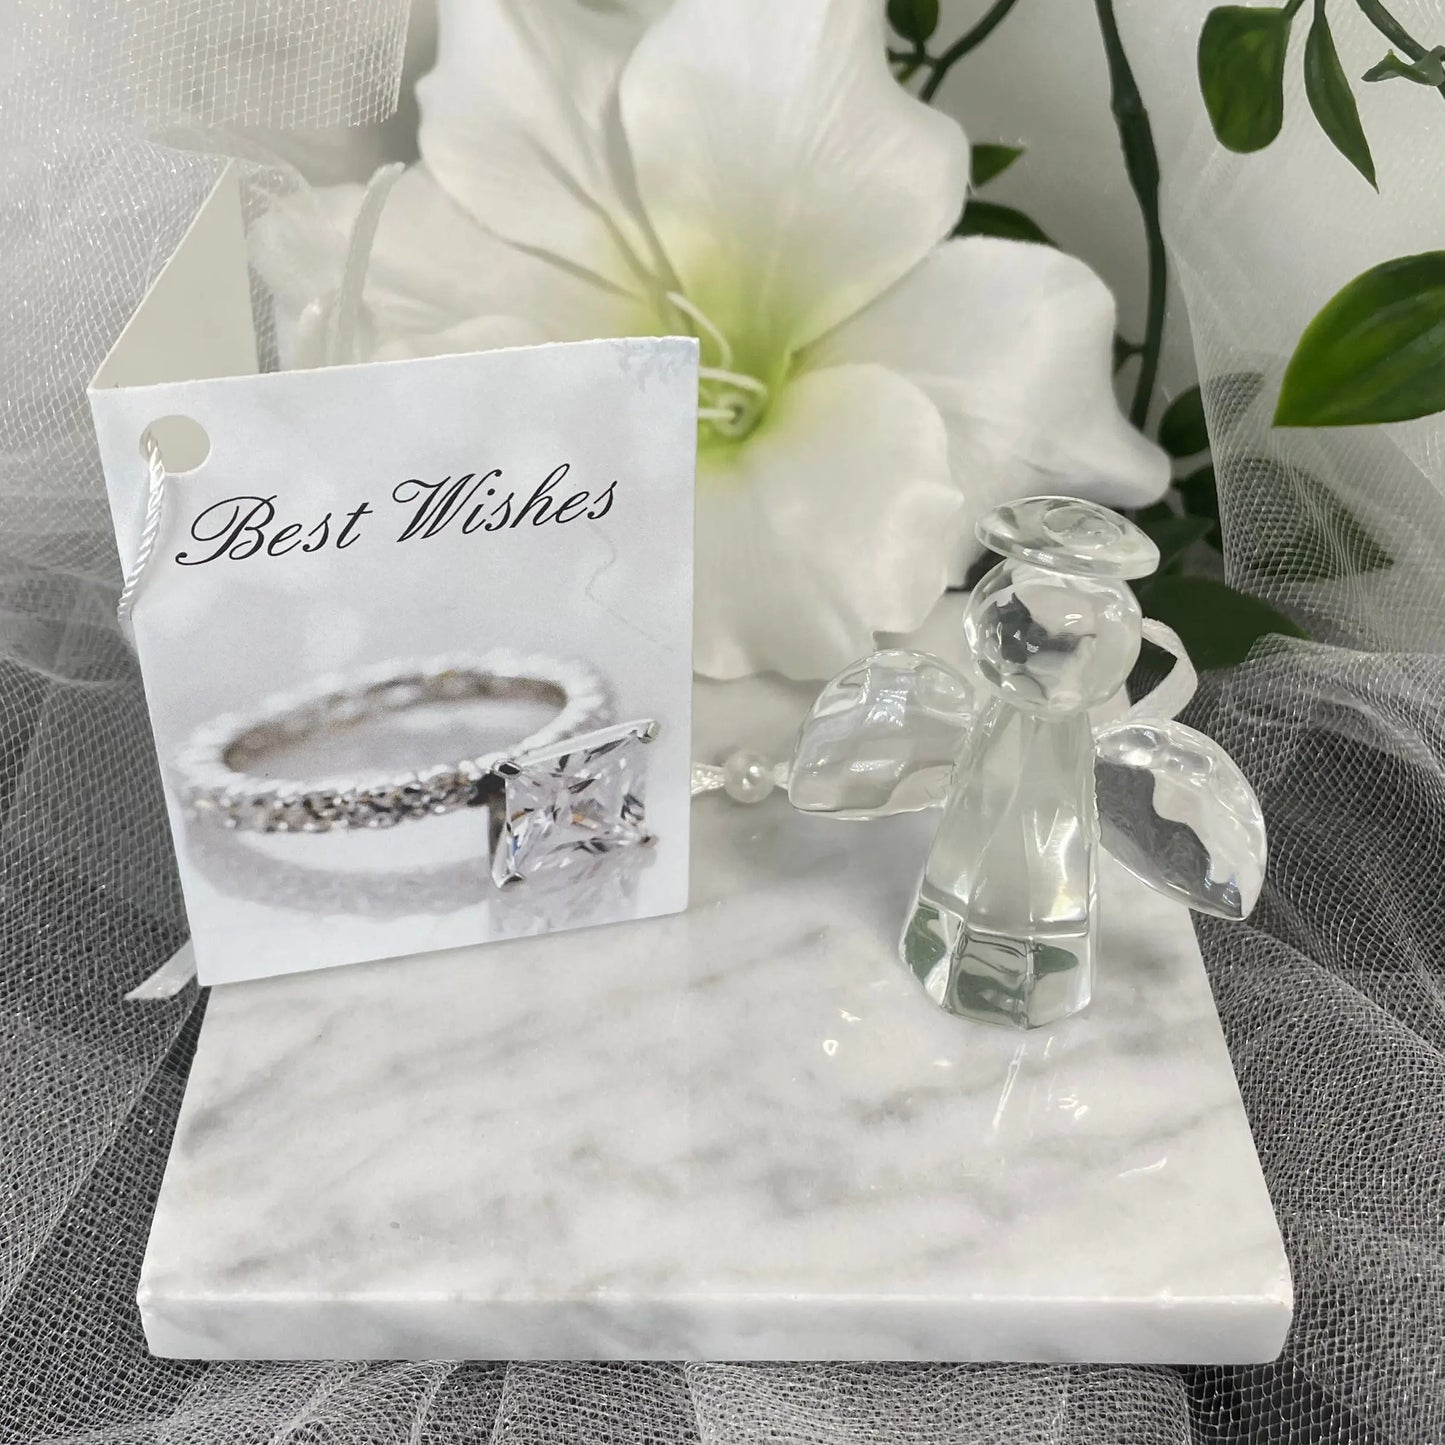 Angel Wrist Charm featuring an intricate design with sparkling crystals, measuring approximately 5.5 cm in height and 4.6 cm in width, perfect for weddings and special occasions.